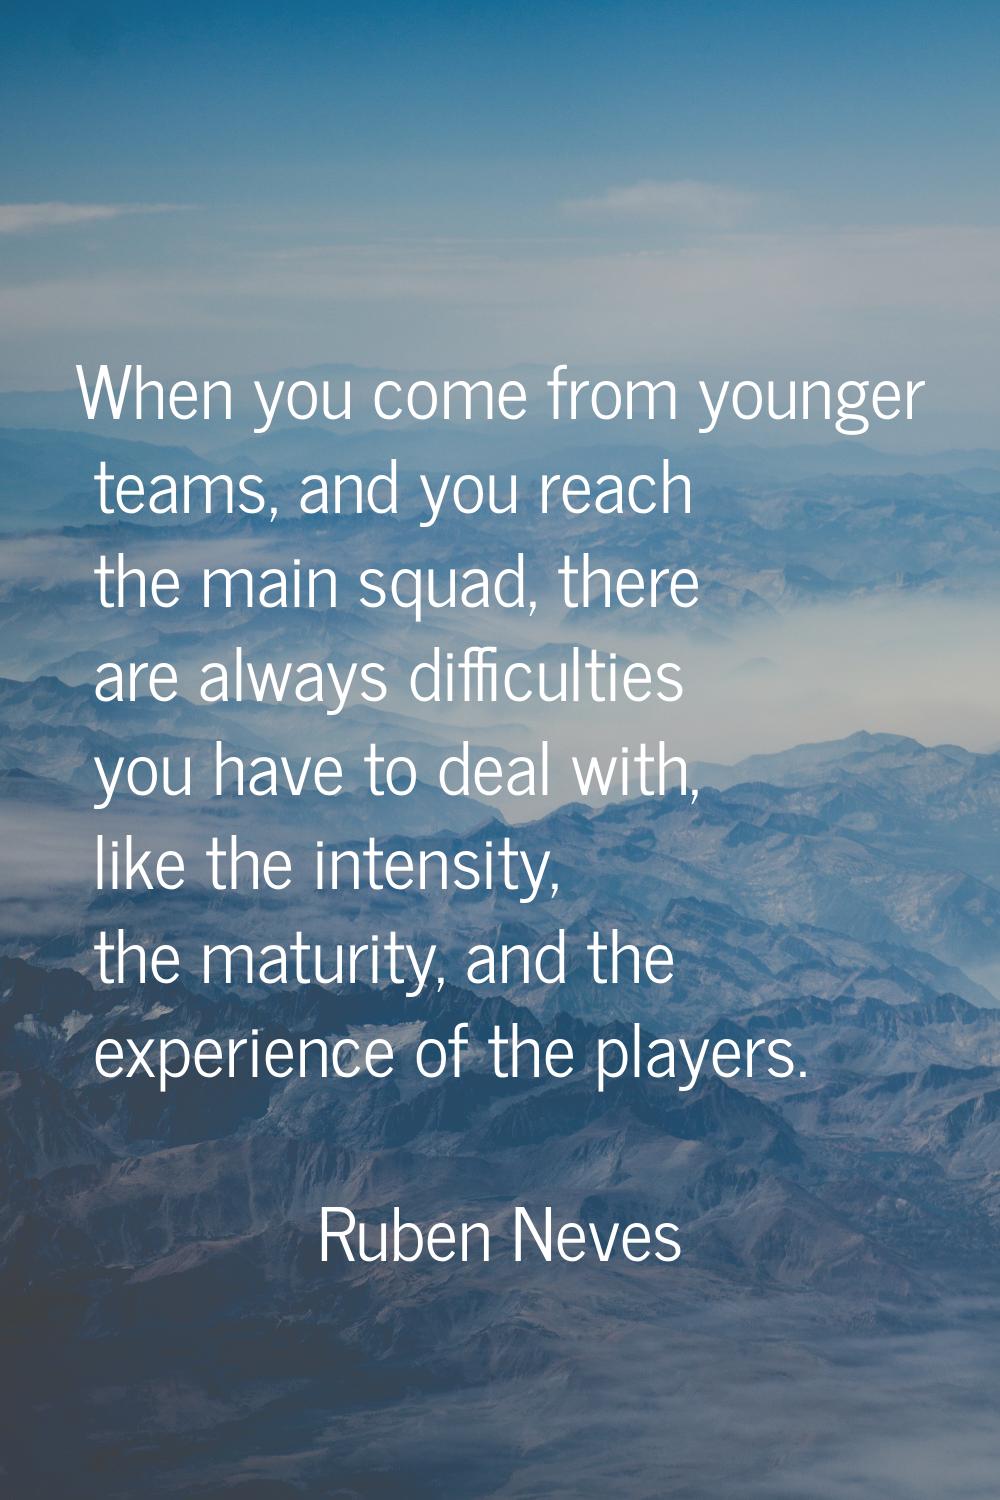 When you come from younger teams, and you reach the main squad, there are always difficulties you h